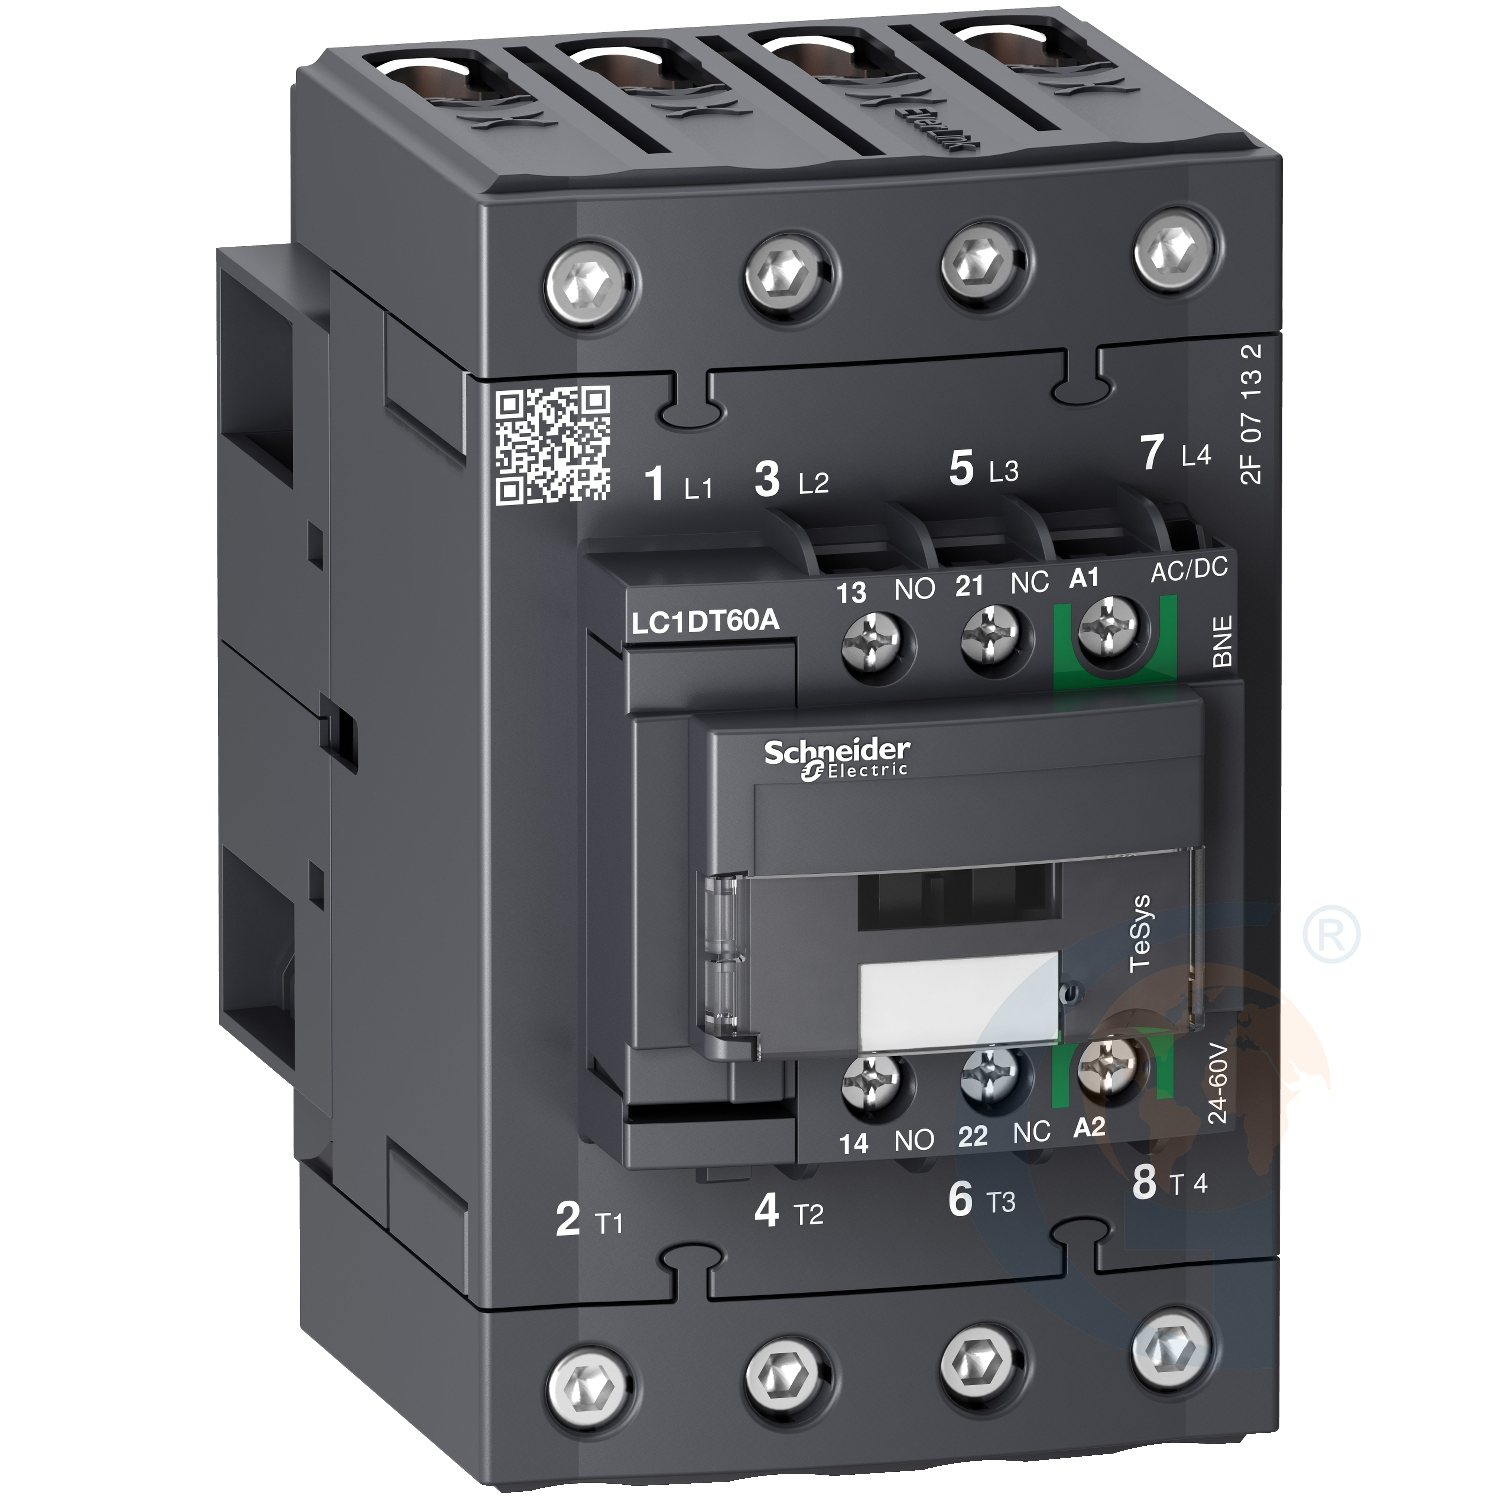 Schneider Electric LC1DT60ABBE TeSys D contactor 4P 60A AC-1 up to 440V coil 24V DC Everlink https://gesrepair.com/wp-content/uploads/2020/Schneider/Schneider_Electric_LC1DT60ABBE_.jpg